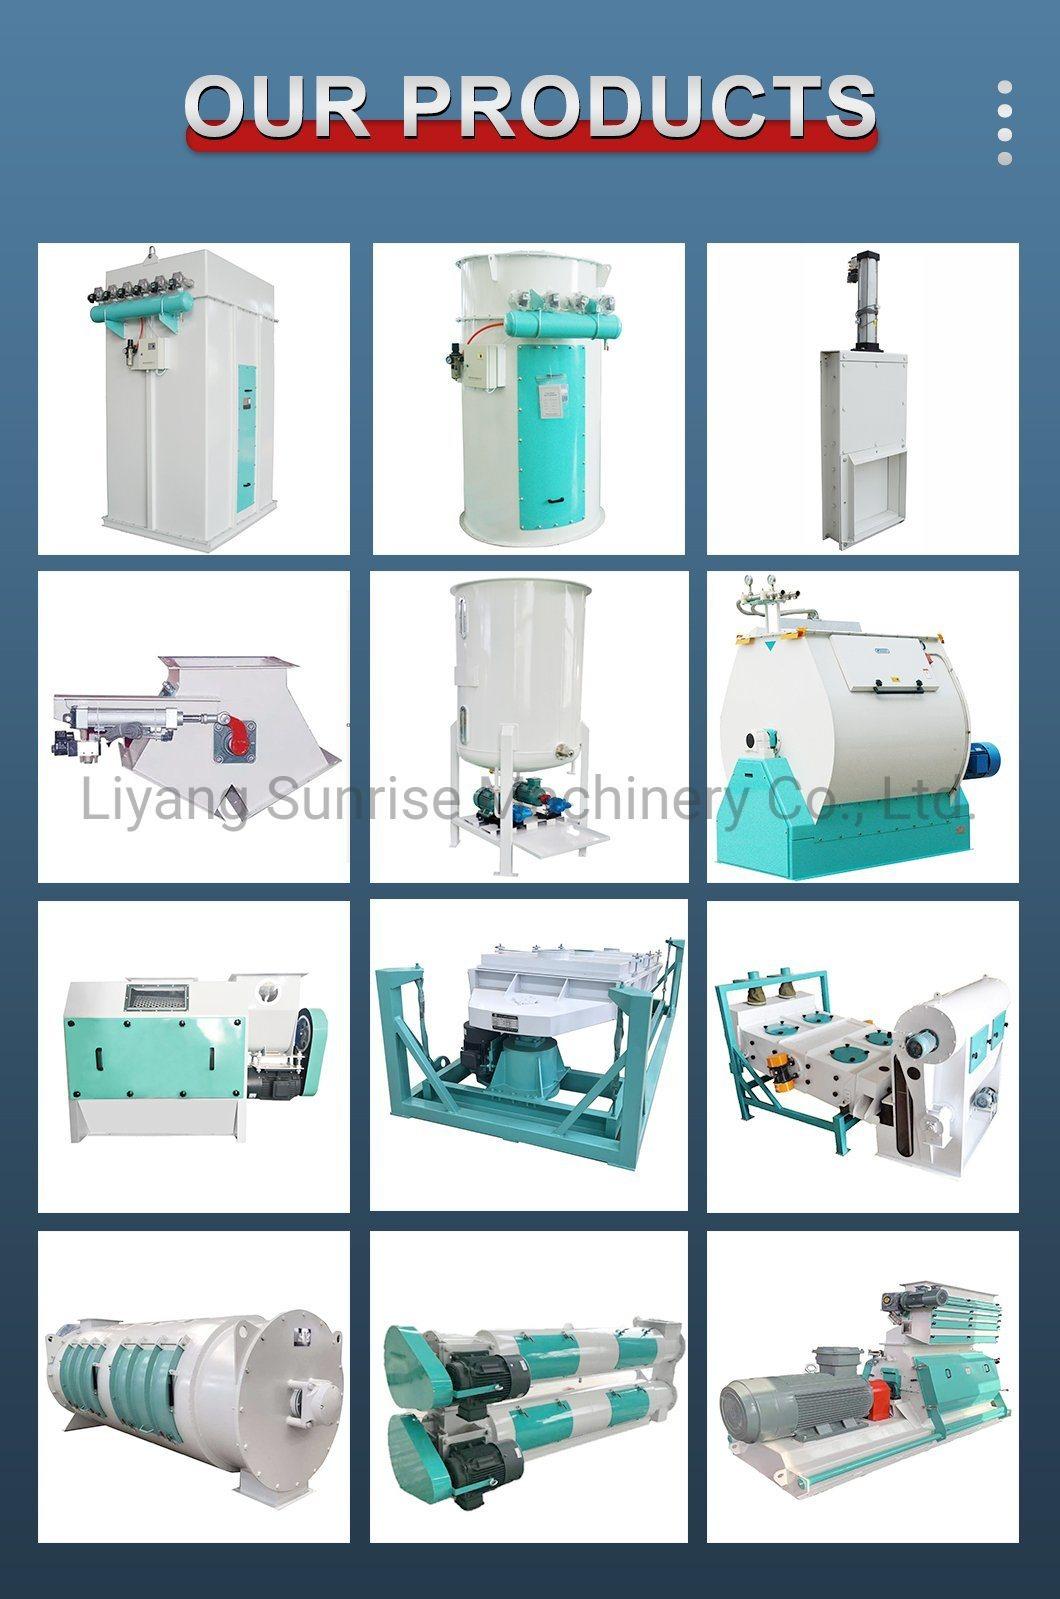 Automatic Granule Bulk/Heavy Bag Sealing Packing for Packing Grains, Nuts, Plastic Particle, Feed, Fertilizer for Sale